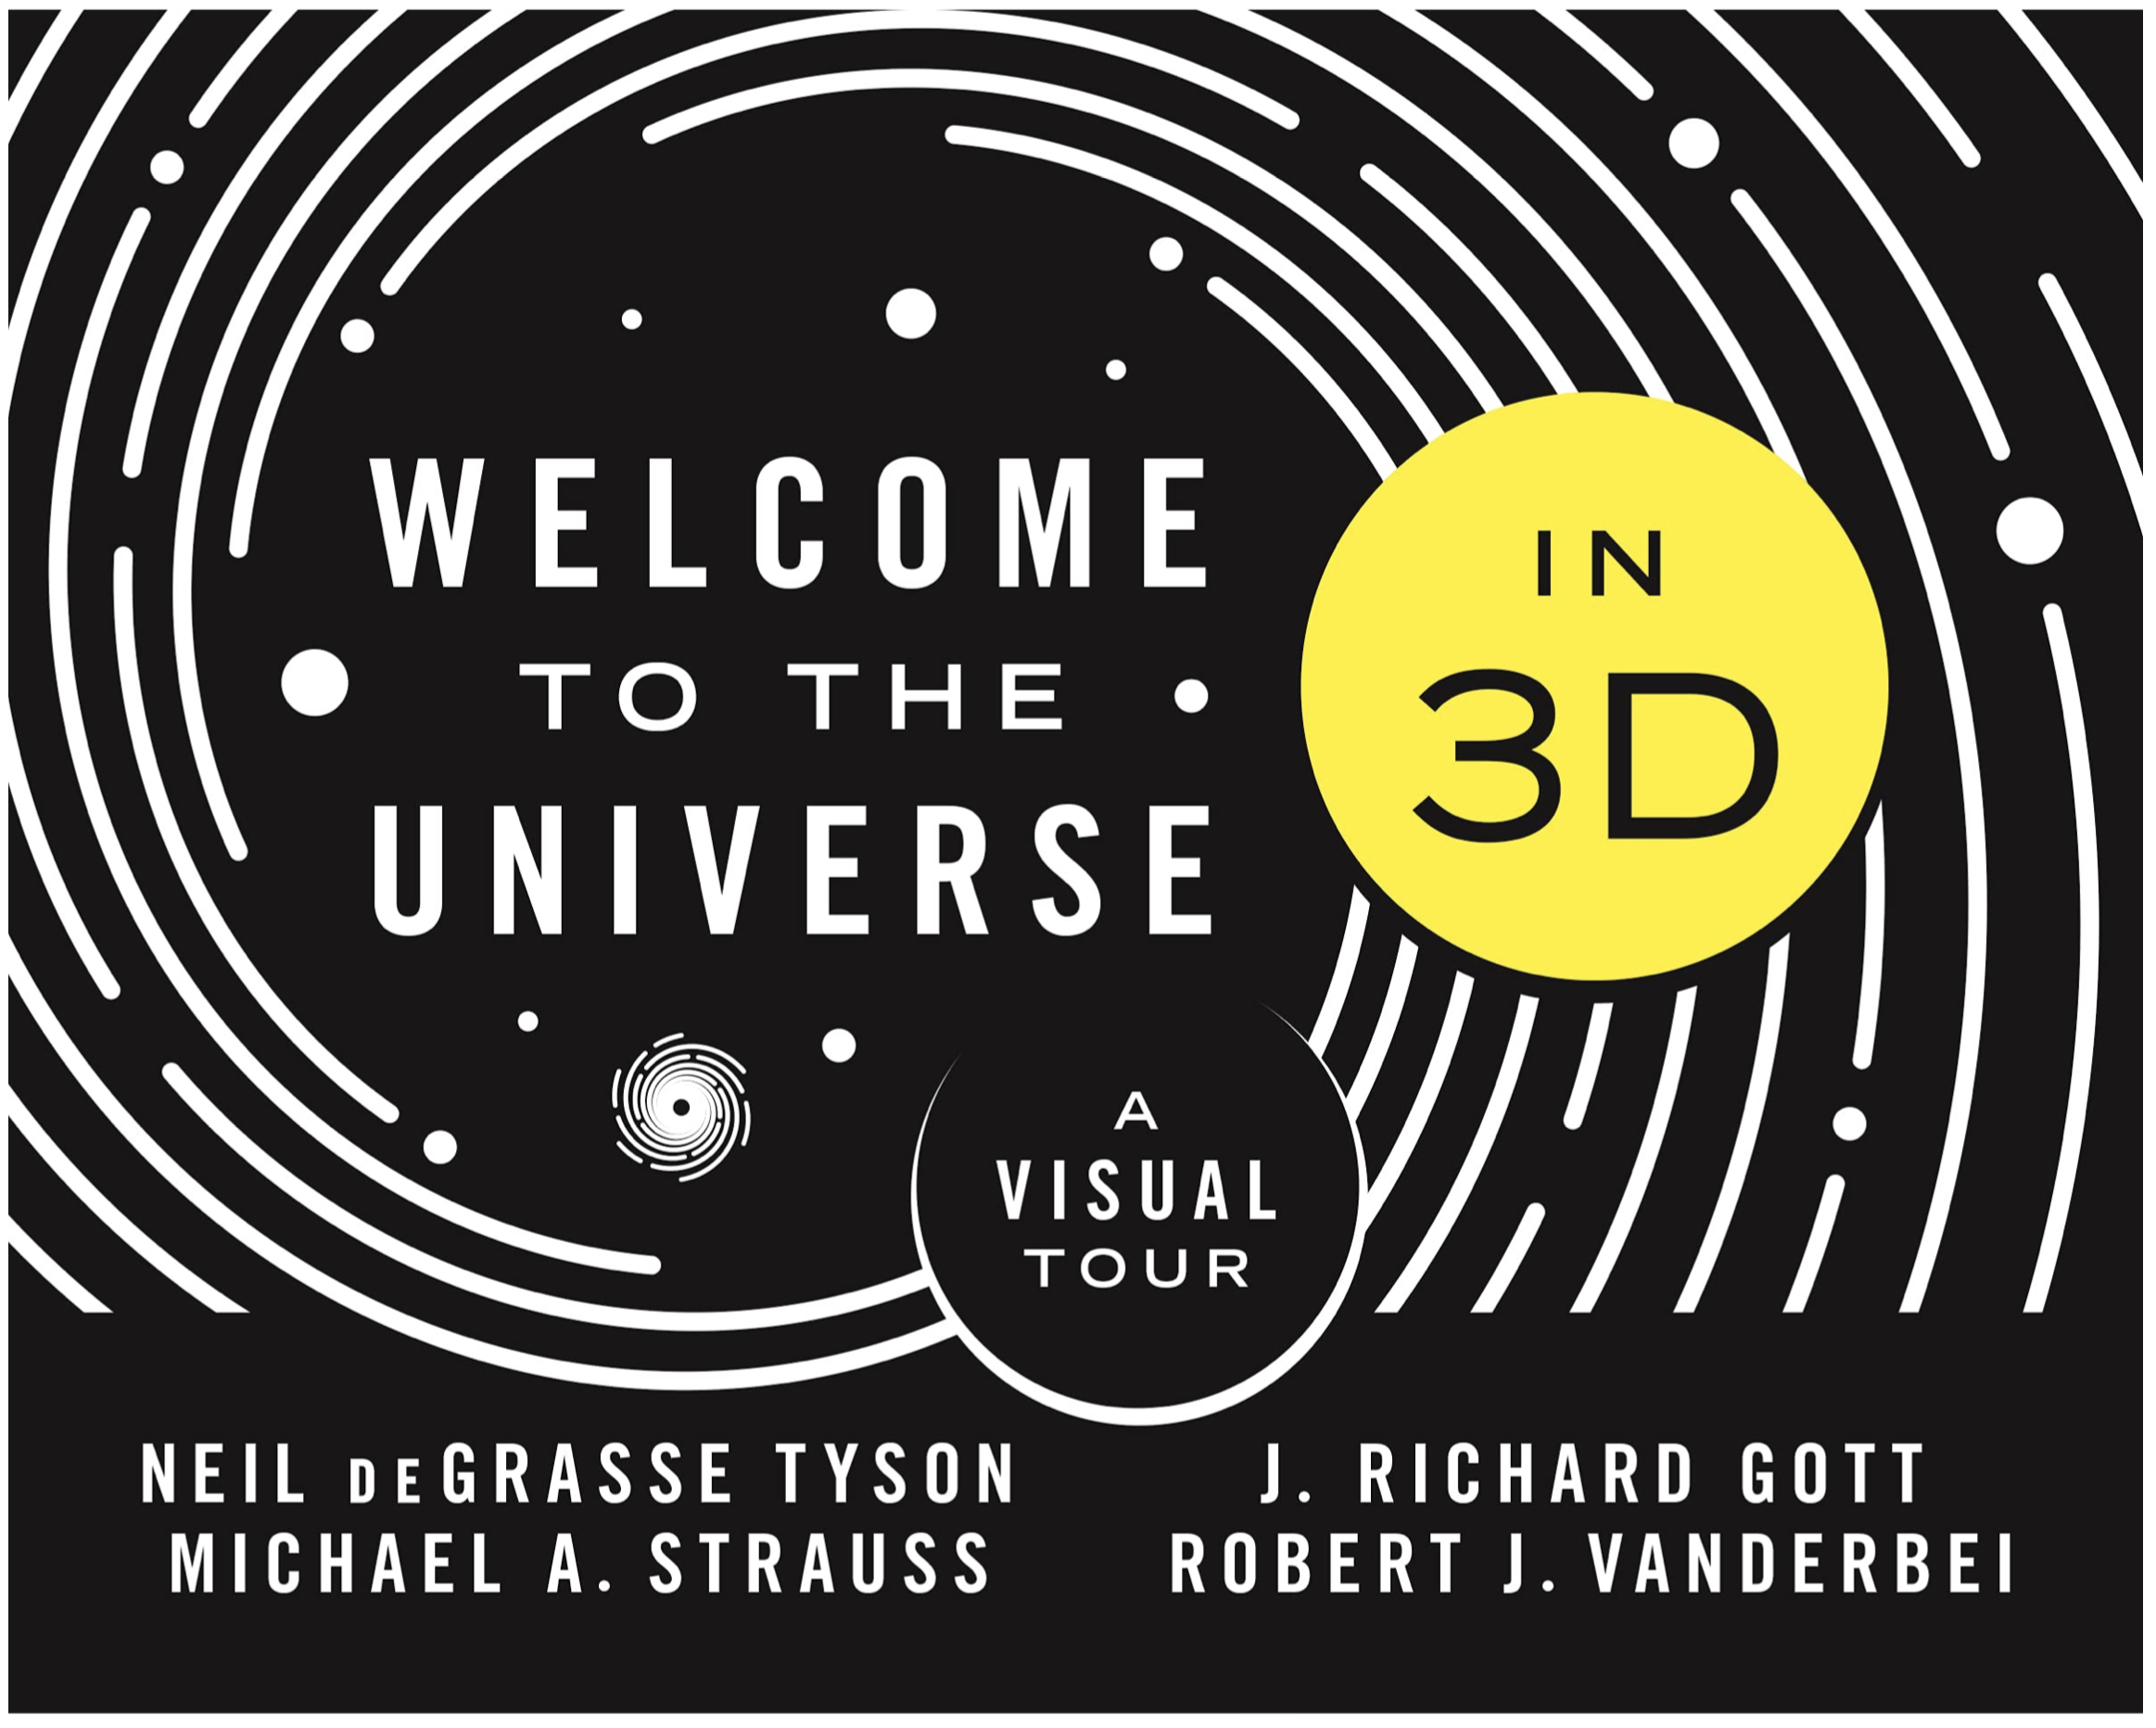 Link to the book Welcome to the Universe in 3D by Neil deGrasse Tyson, Michael A. Strauss, J. Richard Gott, and Robert J. Vanderbei.